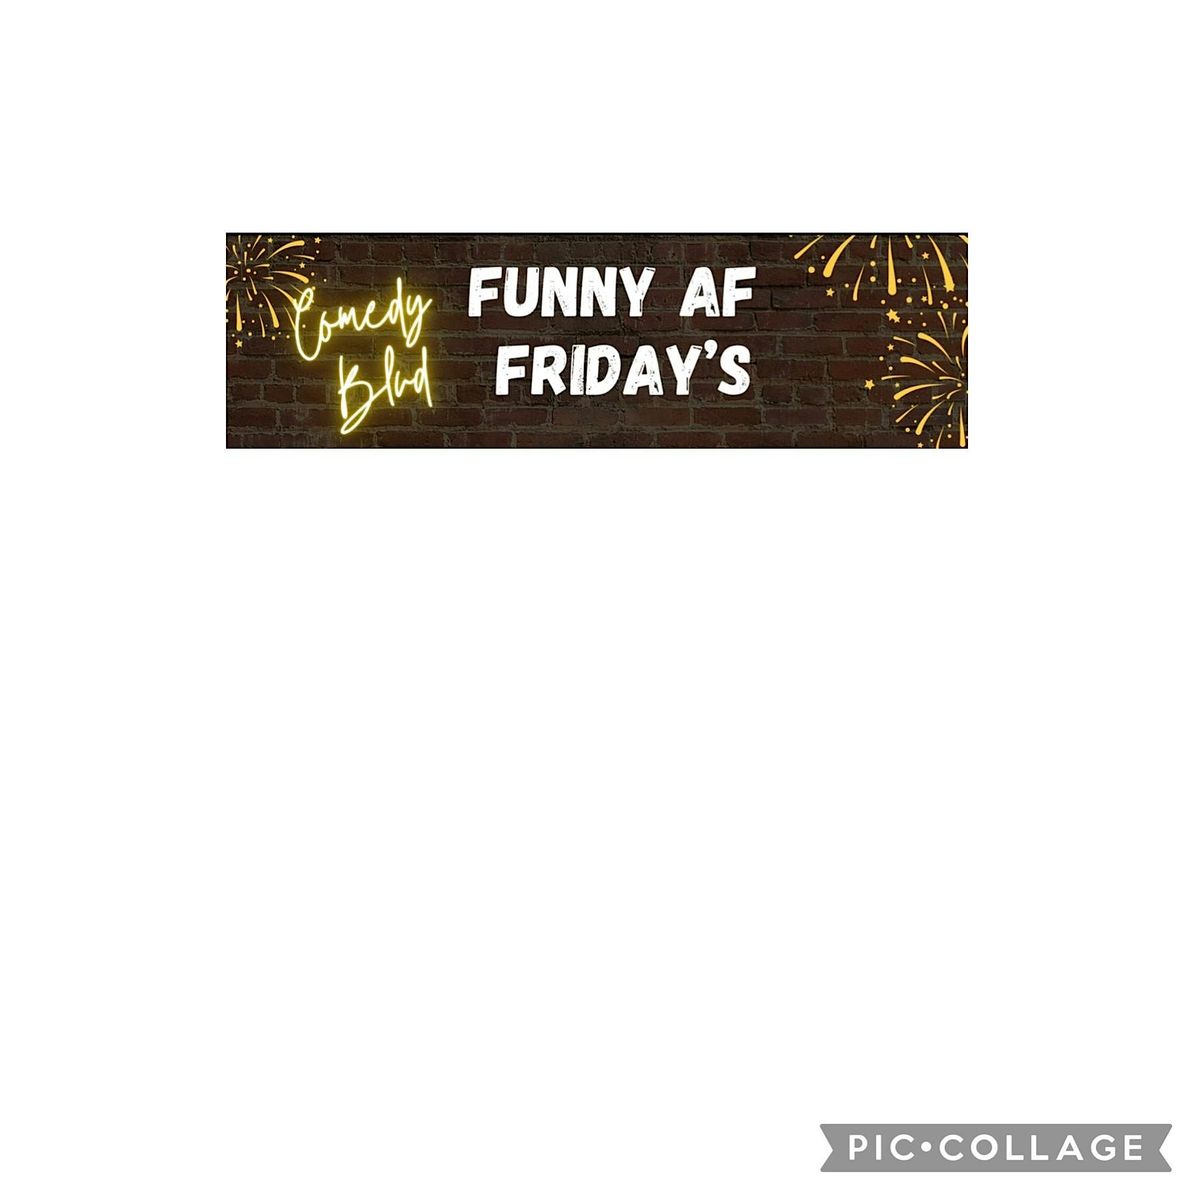 Friday, July 12th, 8:30 PM - Funny AF Friday's!!! Comedy Blvd